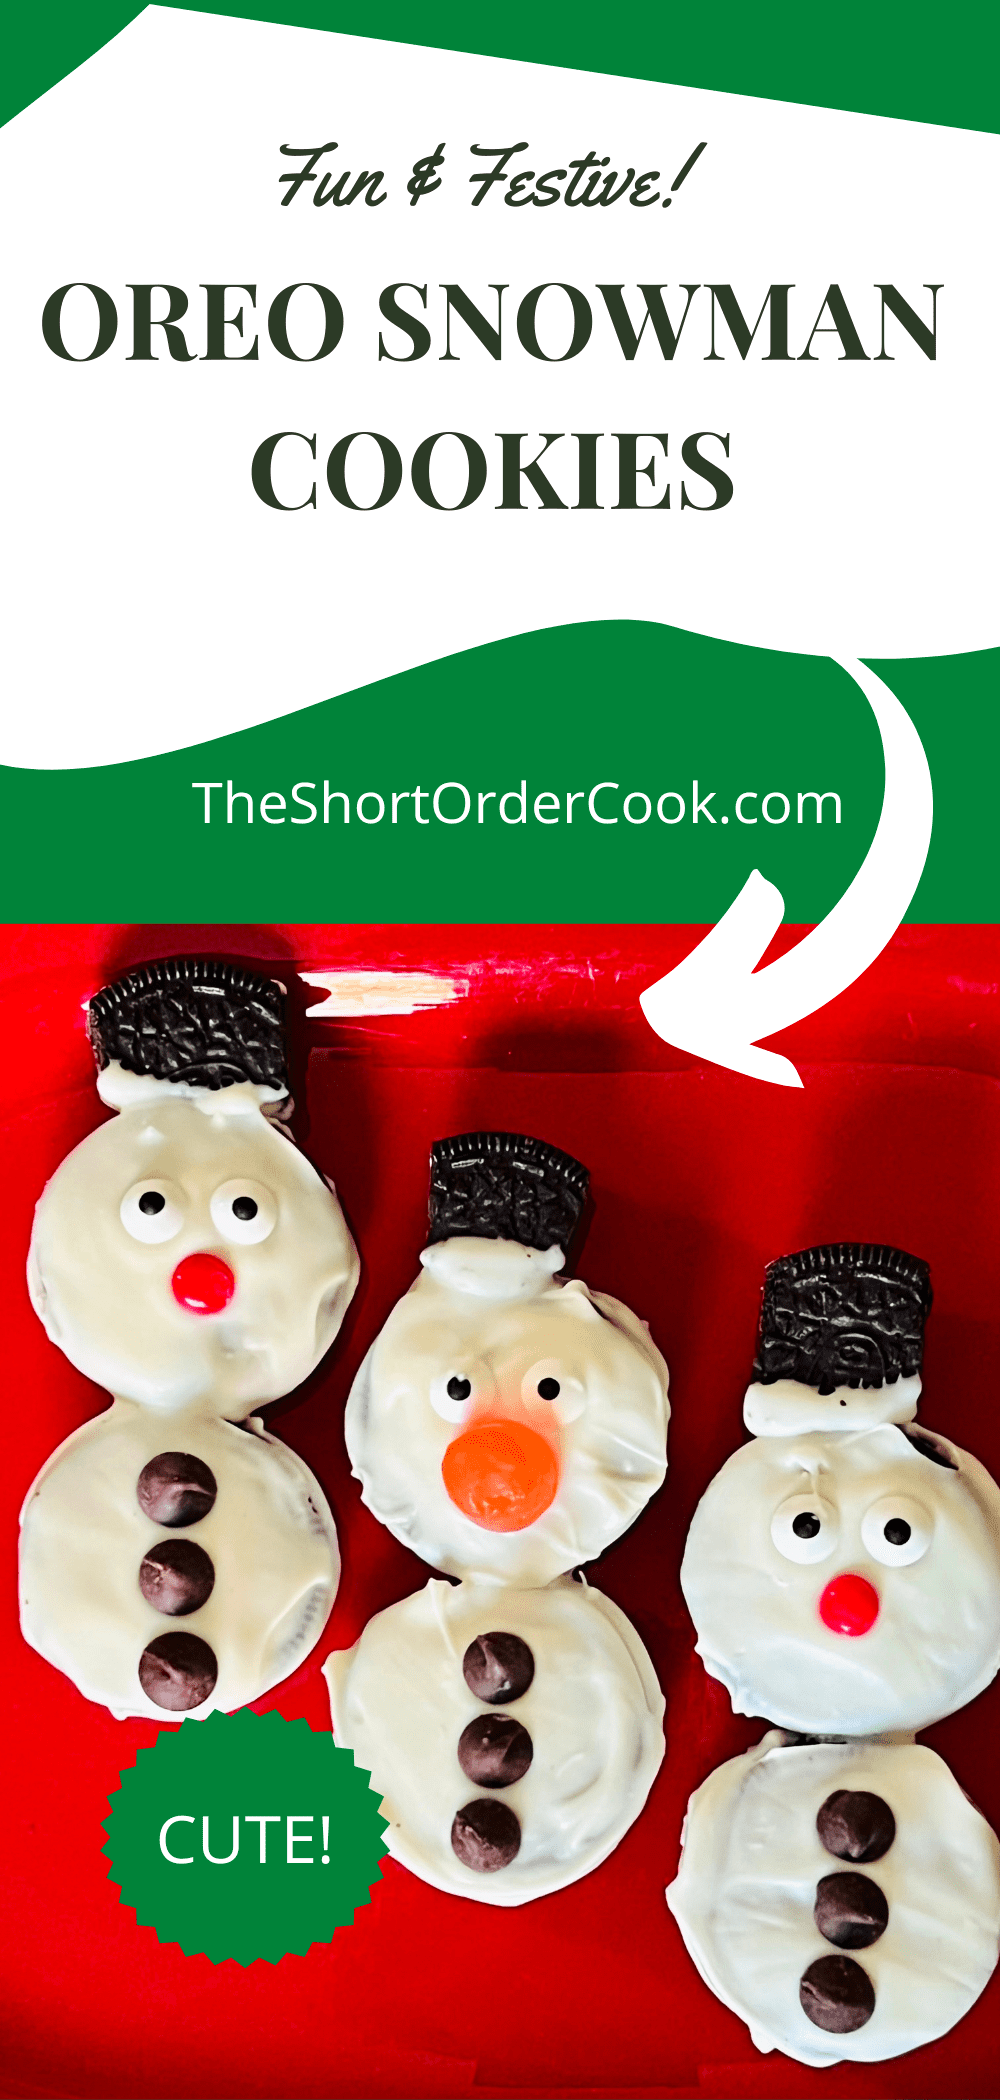 3 Oreo snowman cookies with candy eyeballs gumdrop noses and chocolate chip buttons.